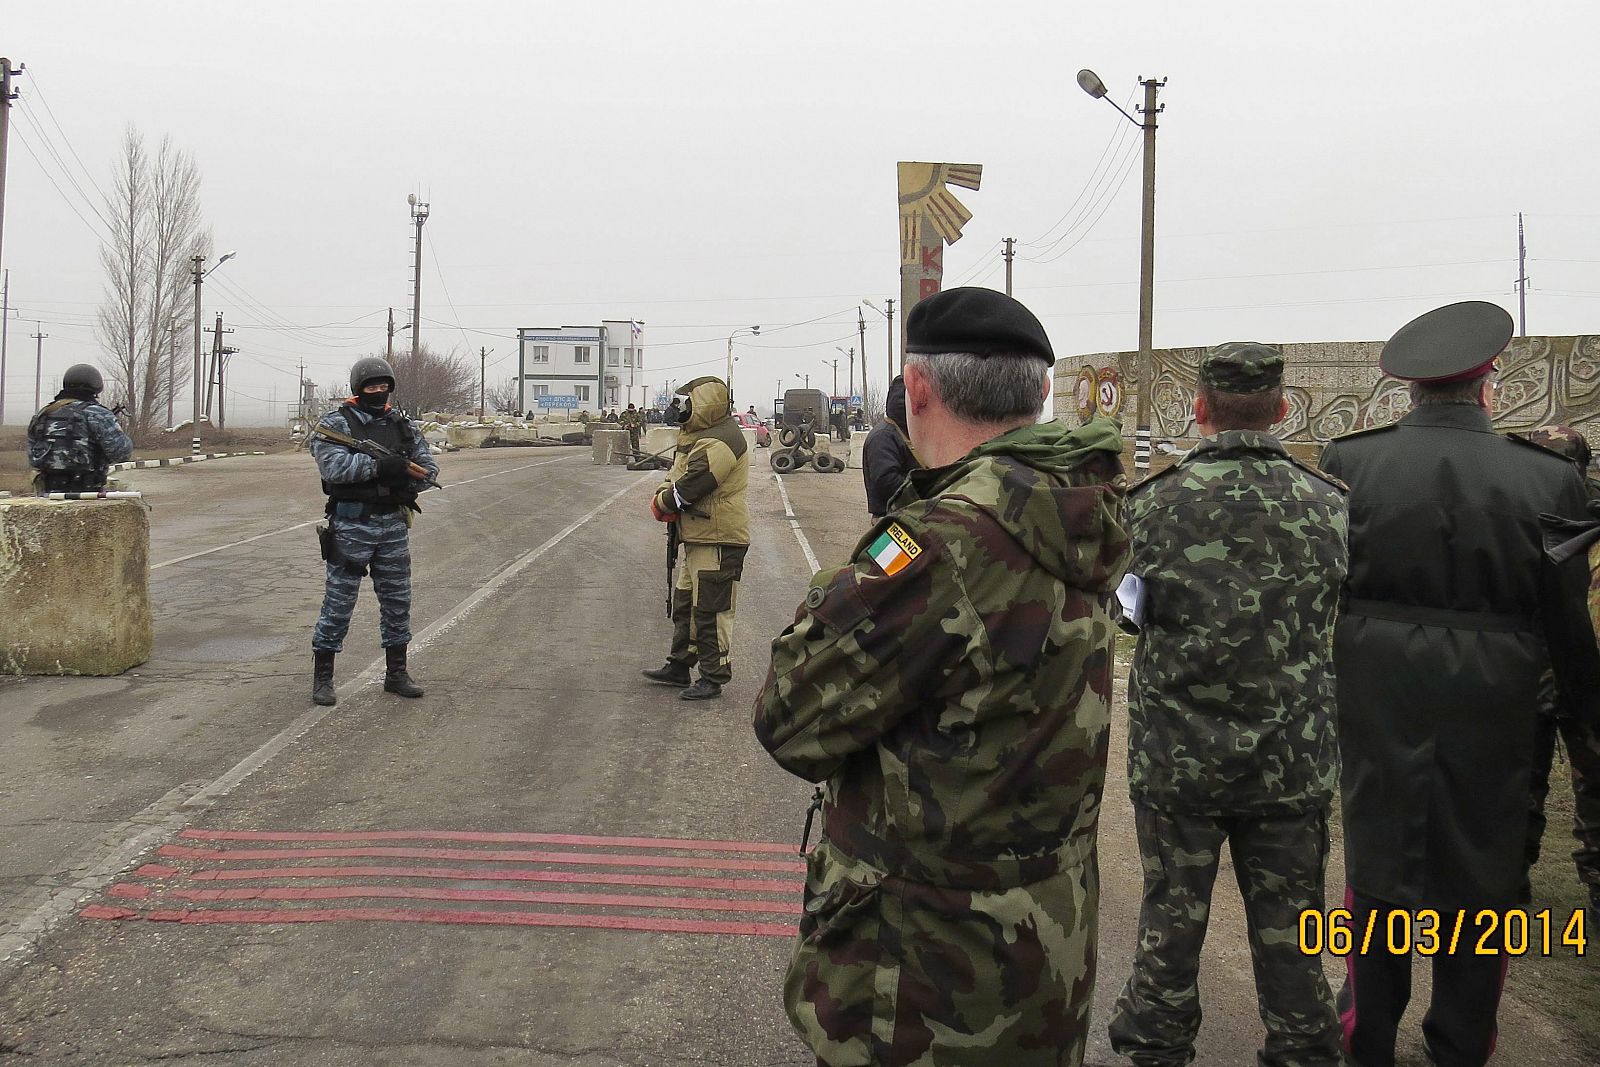 OSCE observers turned away at checkpoint